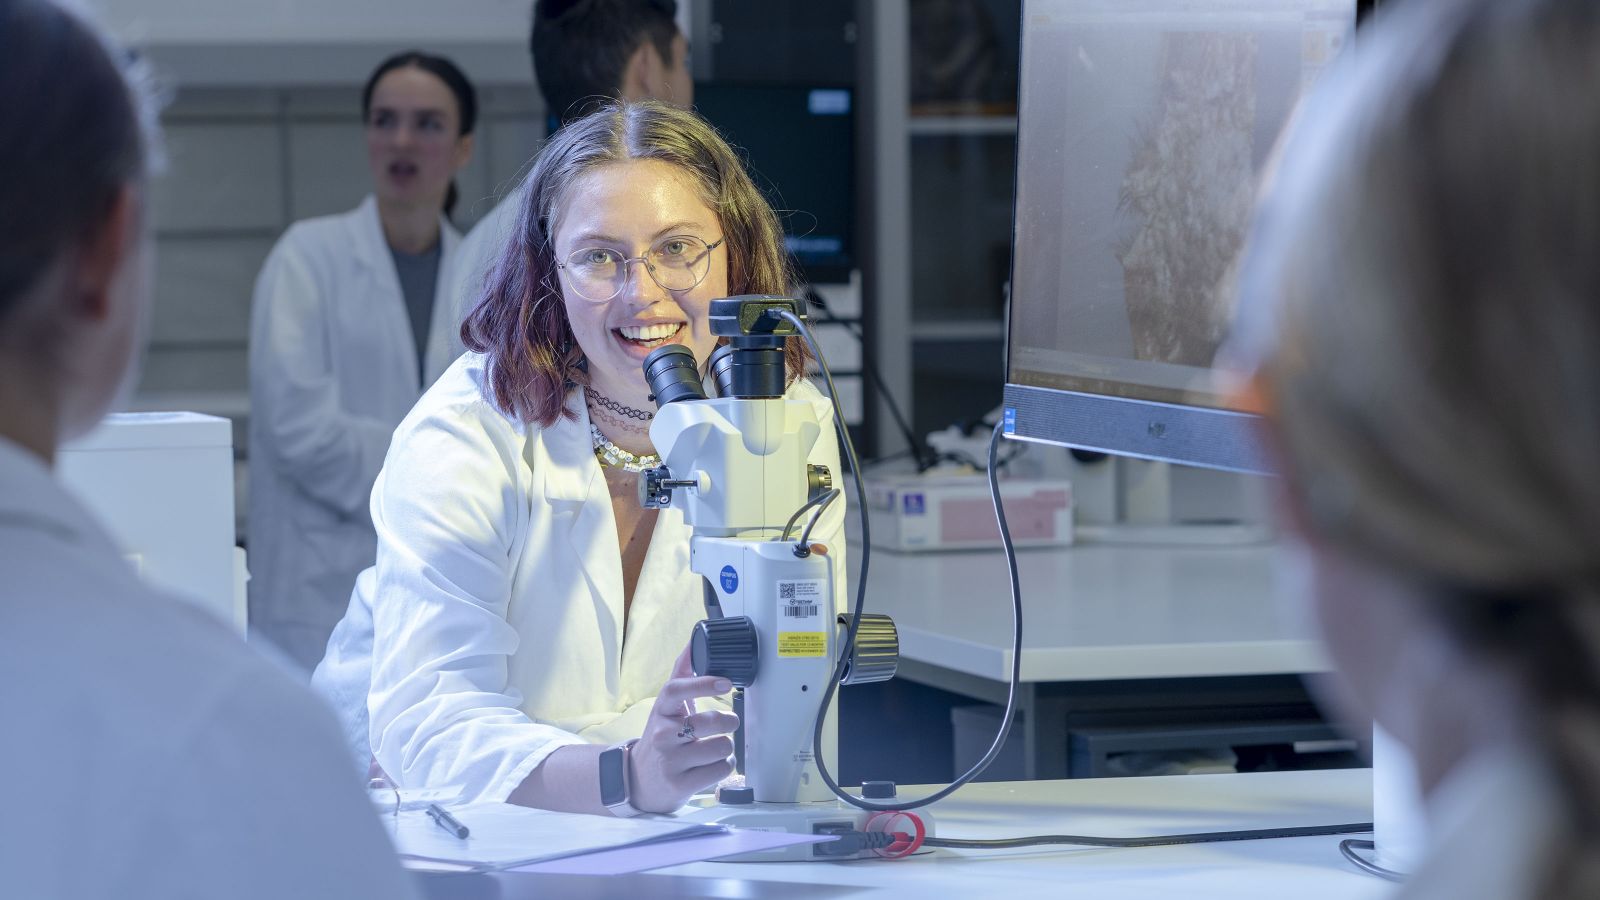 A female student stands behind a microscope